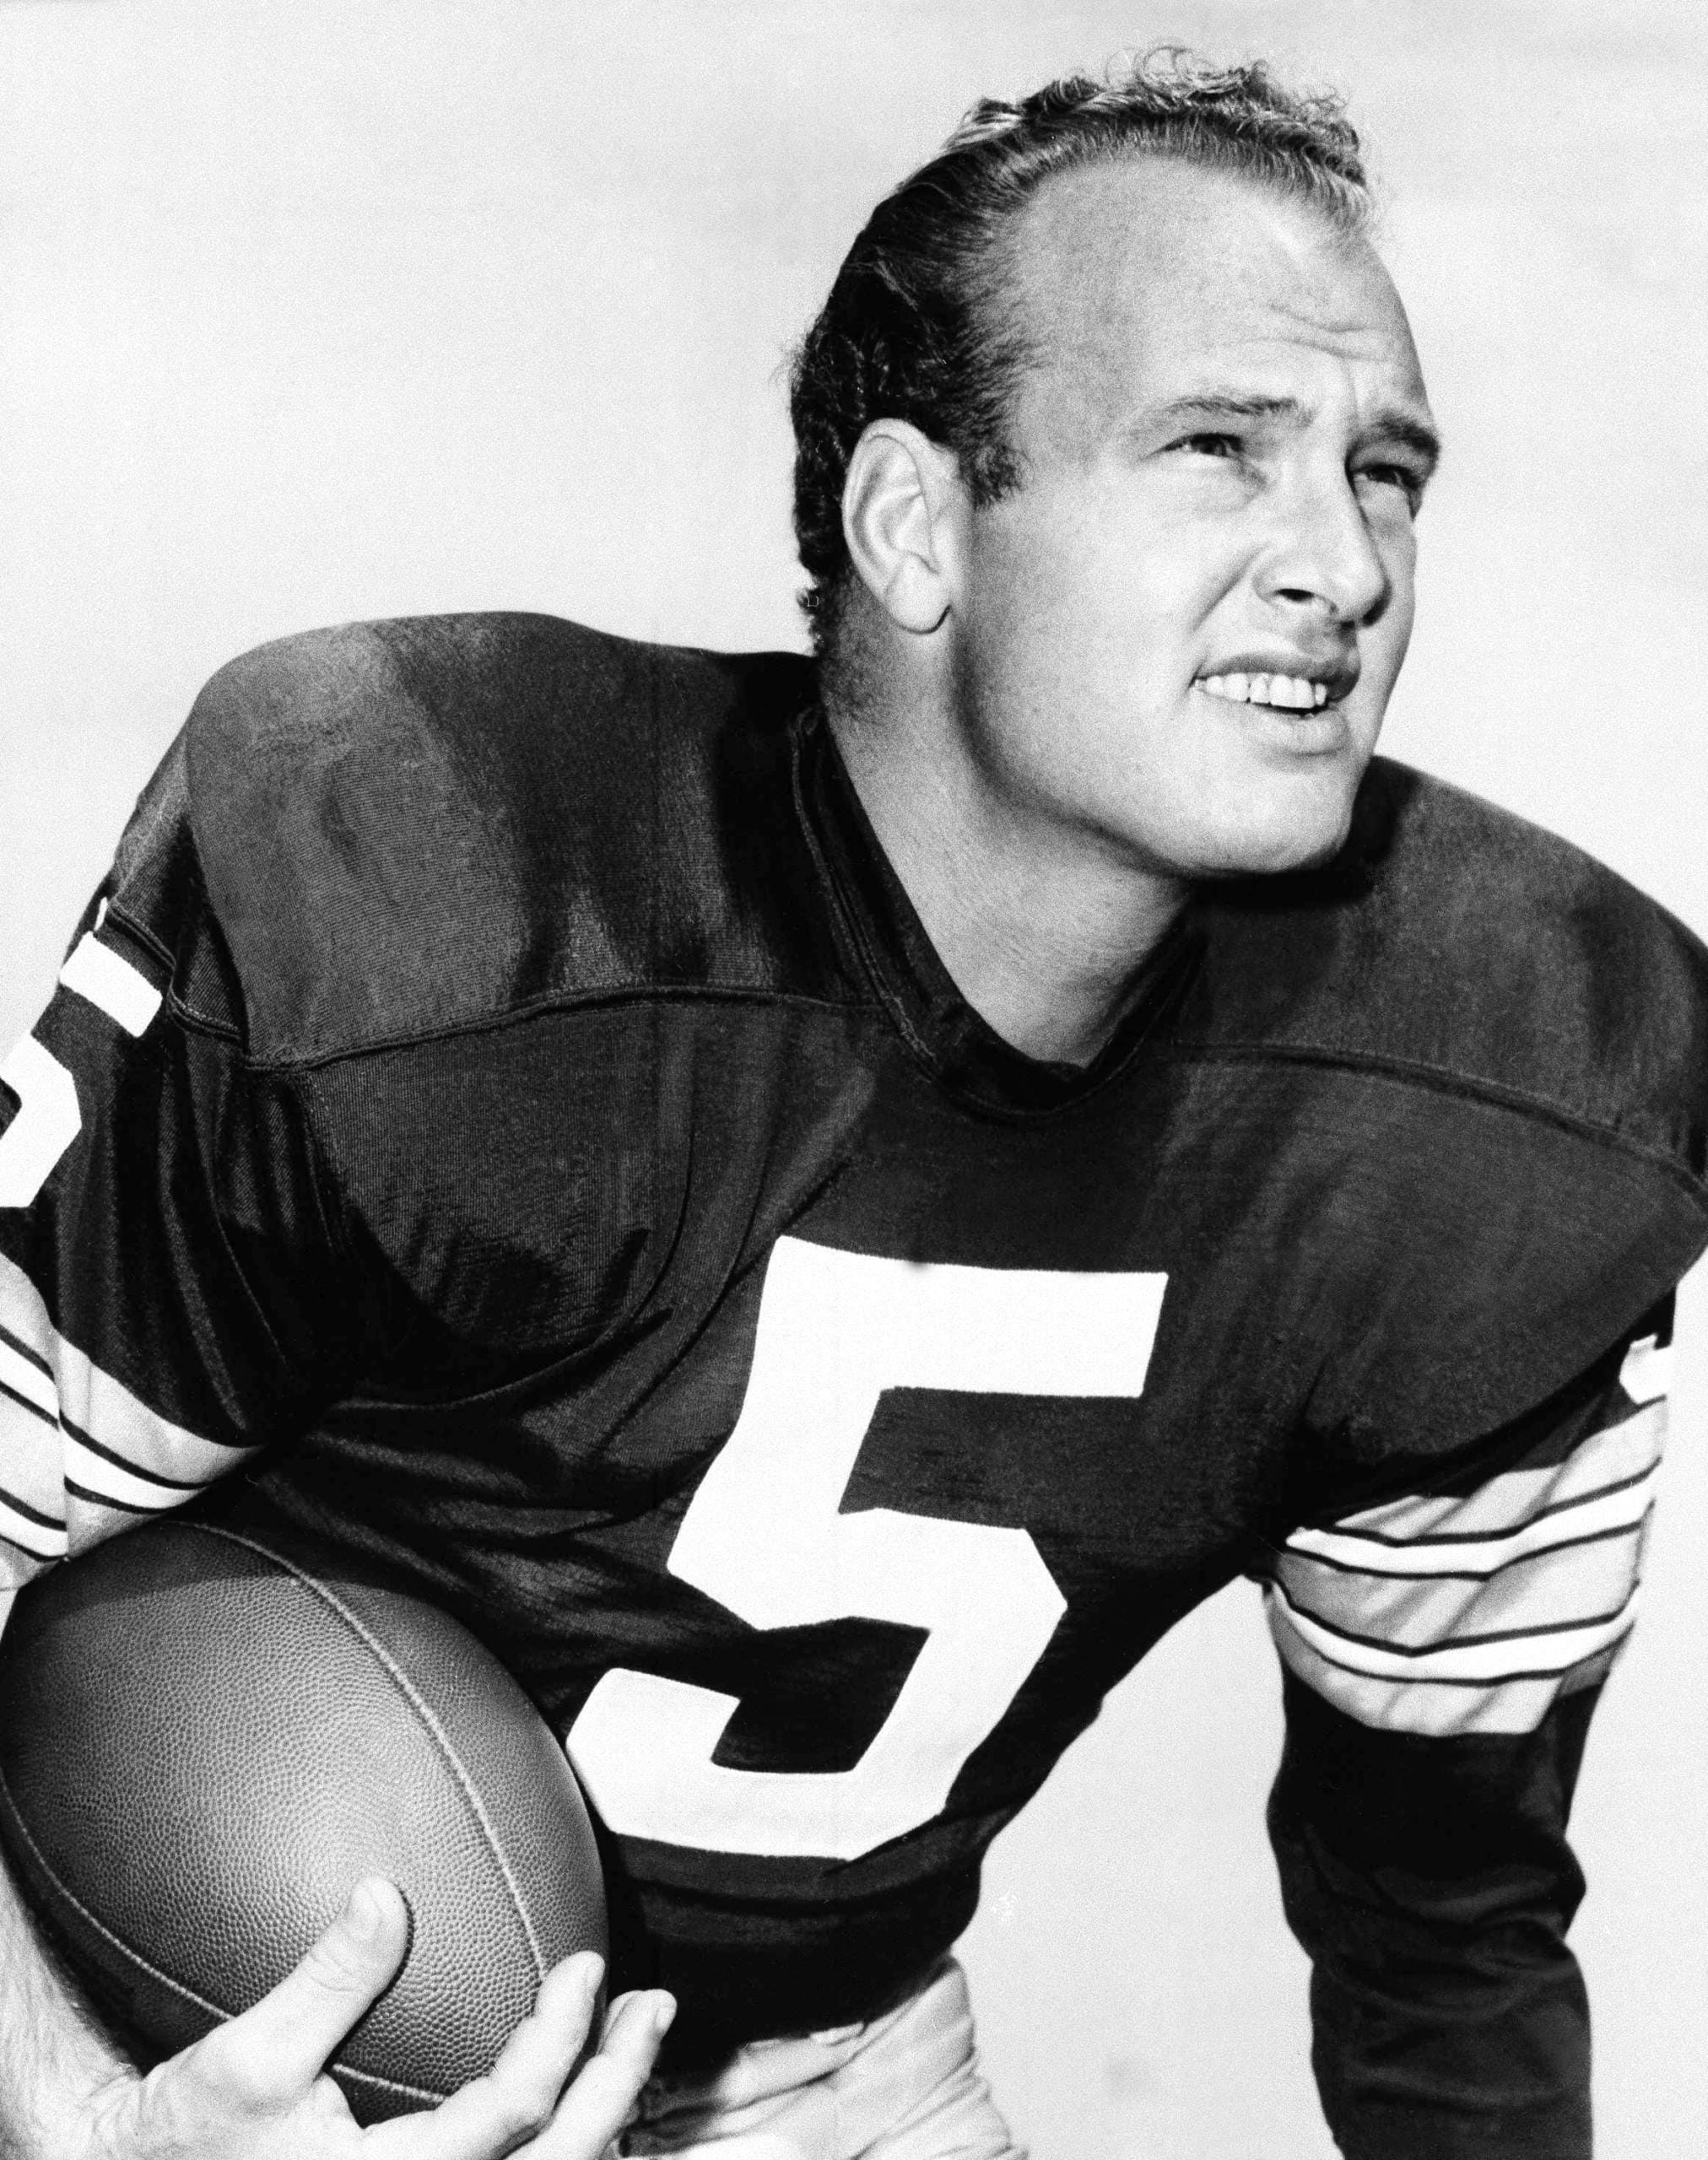 Paul Hornung, of the Green Bay Packers, in an undated photo. Hornung, the dazzling “Golden Boy” of the Green Bay Packers whose singular ability to generate points as a runner, receiver, quarterback, and kicker helped turn them into an NFL dynasty, has died, Friday, Nov. 13, 2020. He was 84.